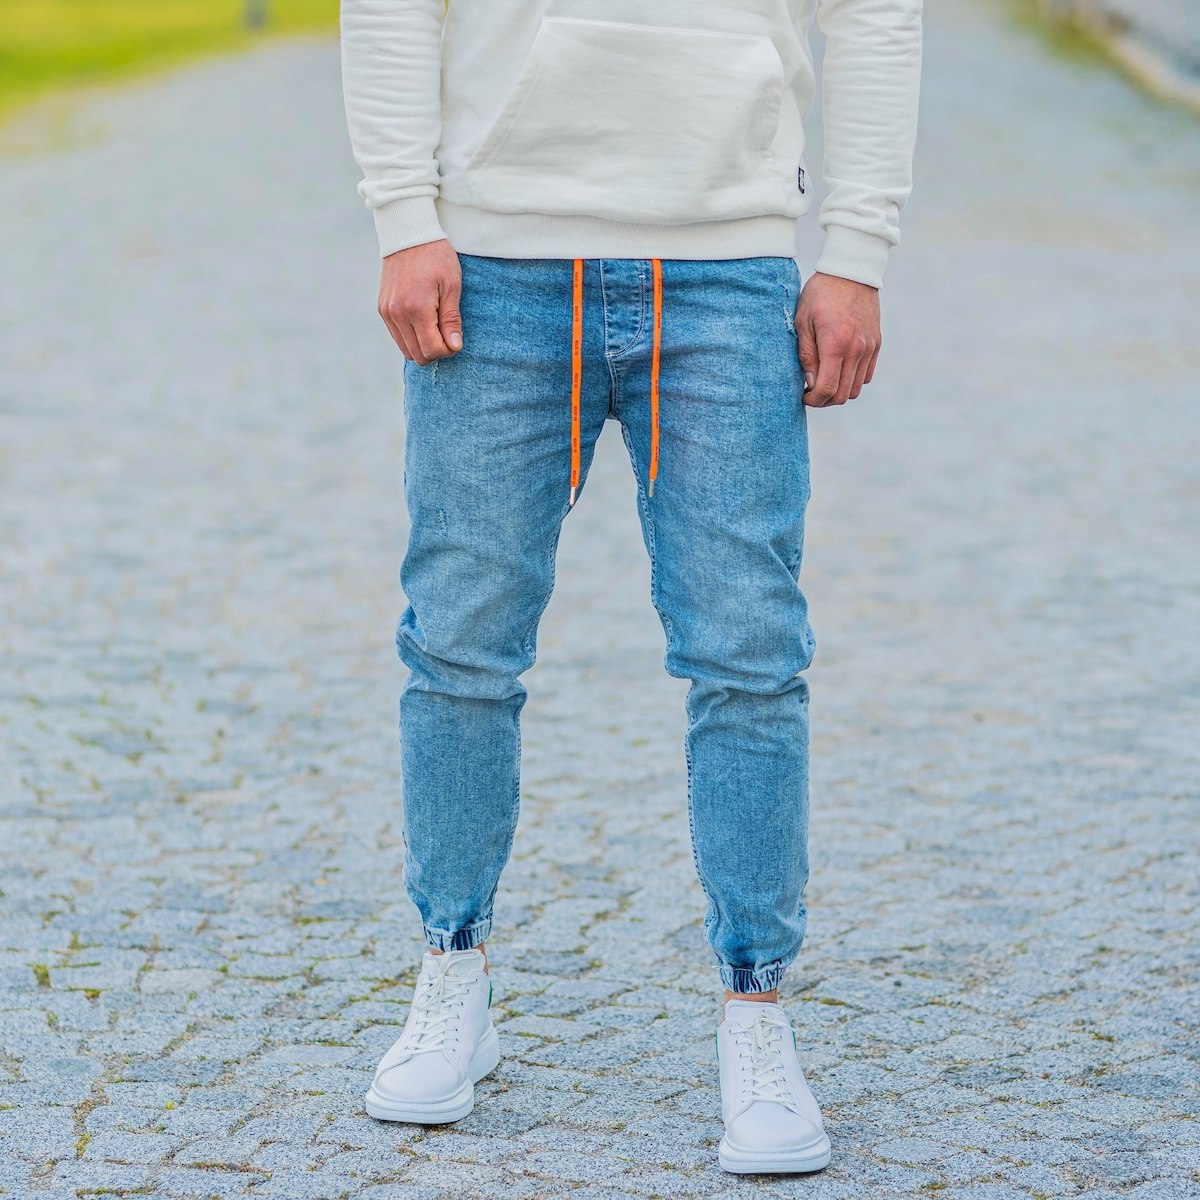 Men's Denim Joggers In Washed Blue